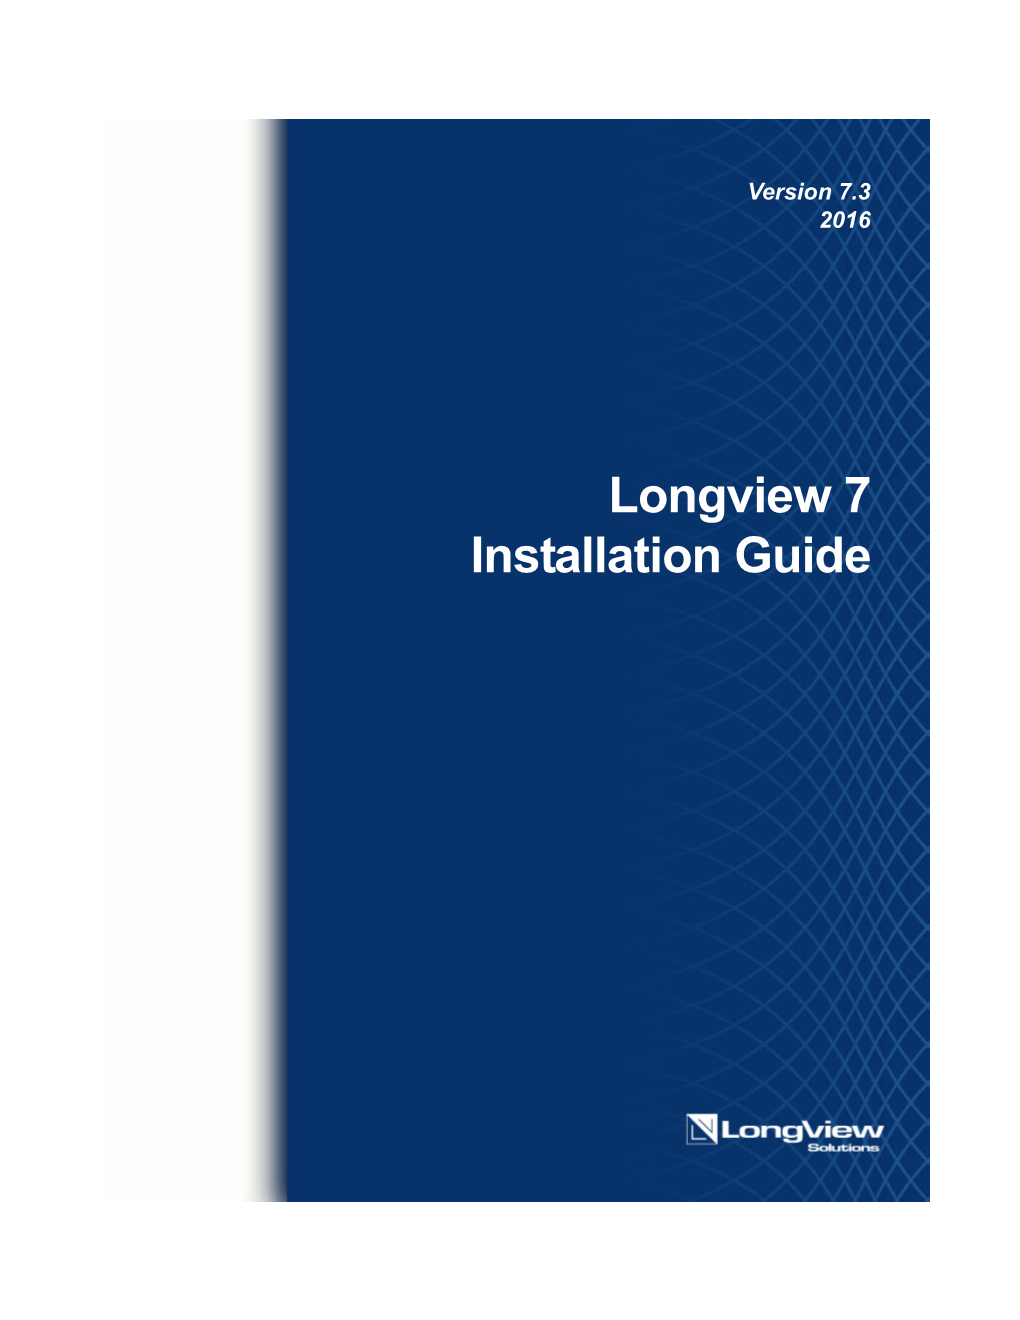 Longview 7 Installation Guide the Contents of This Document and the Associated Software Are the Property of Longview Solutions and Are Copyrighted